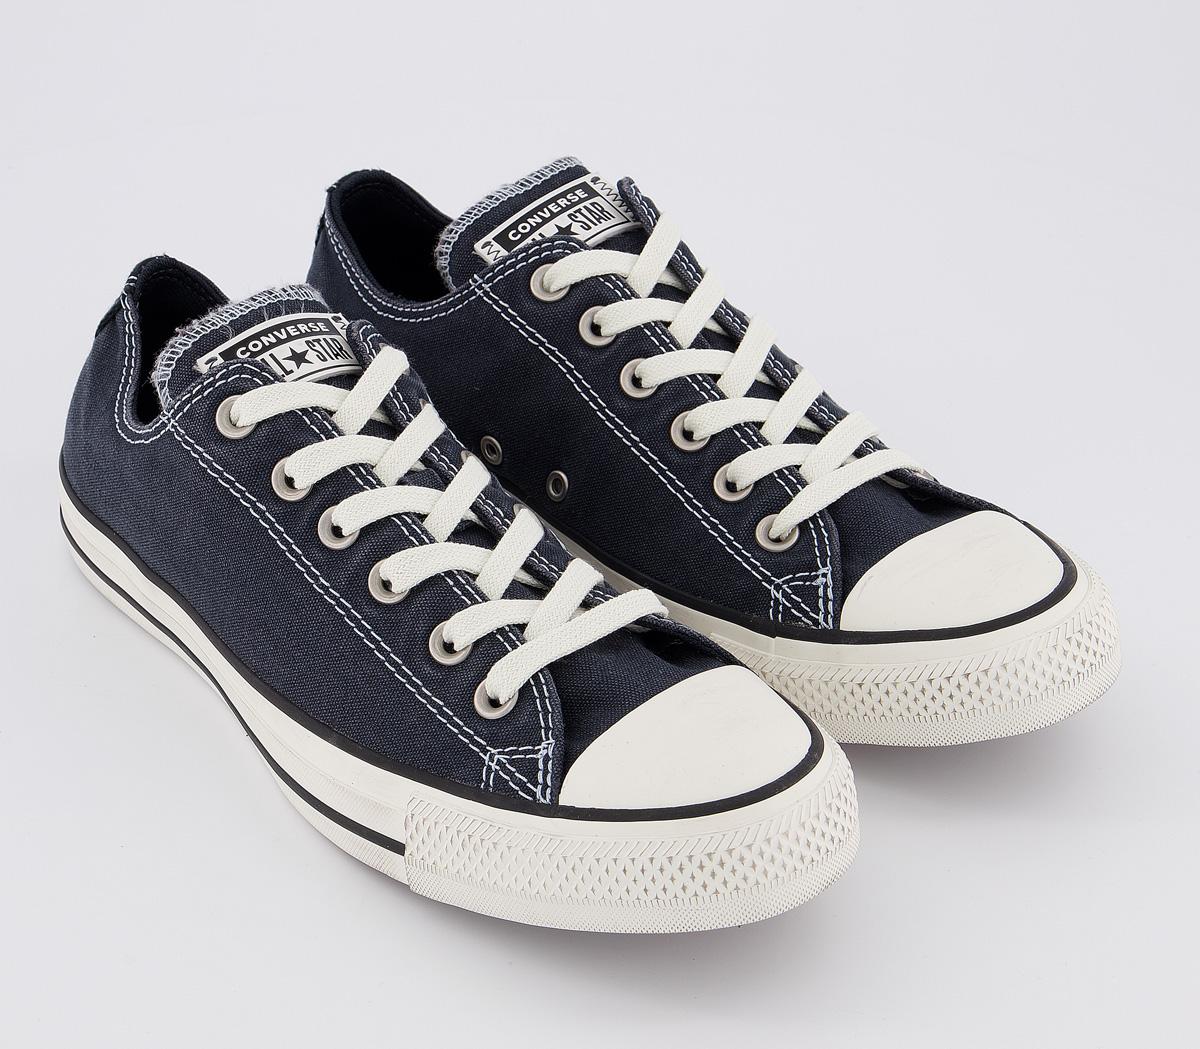 Converse Converse All Star Low Trainers Navy Faded Egret Black - His ...